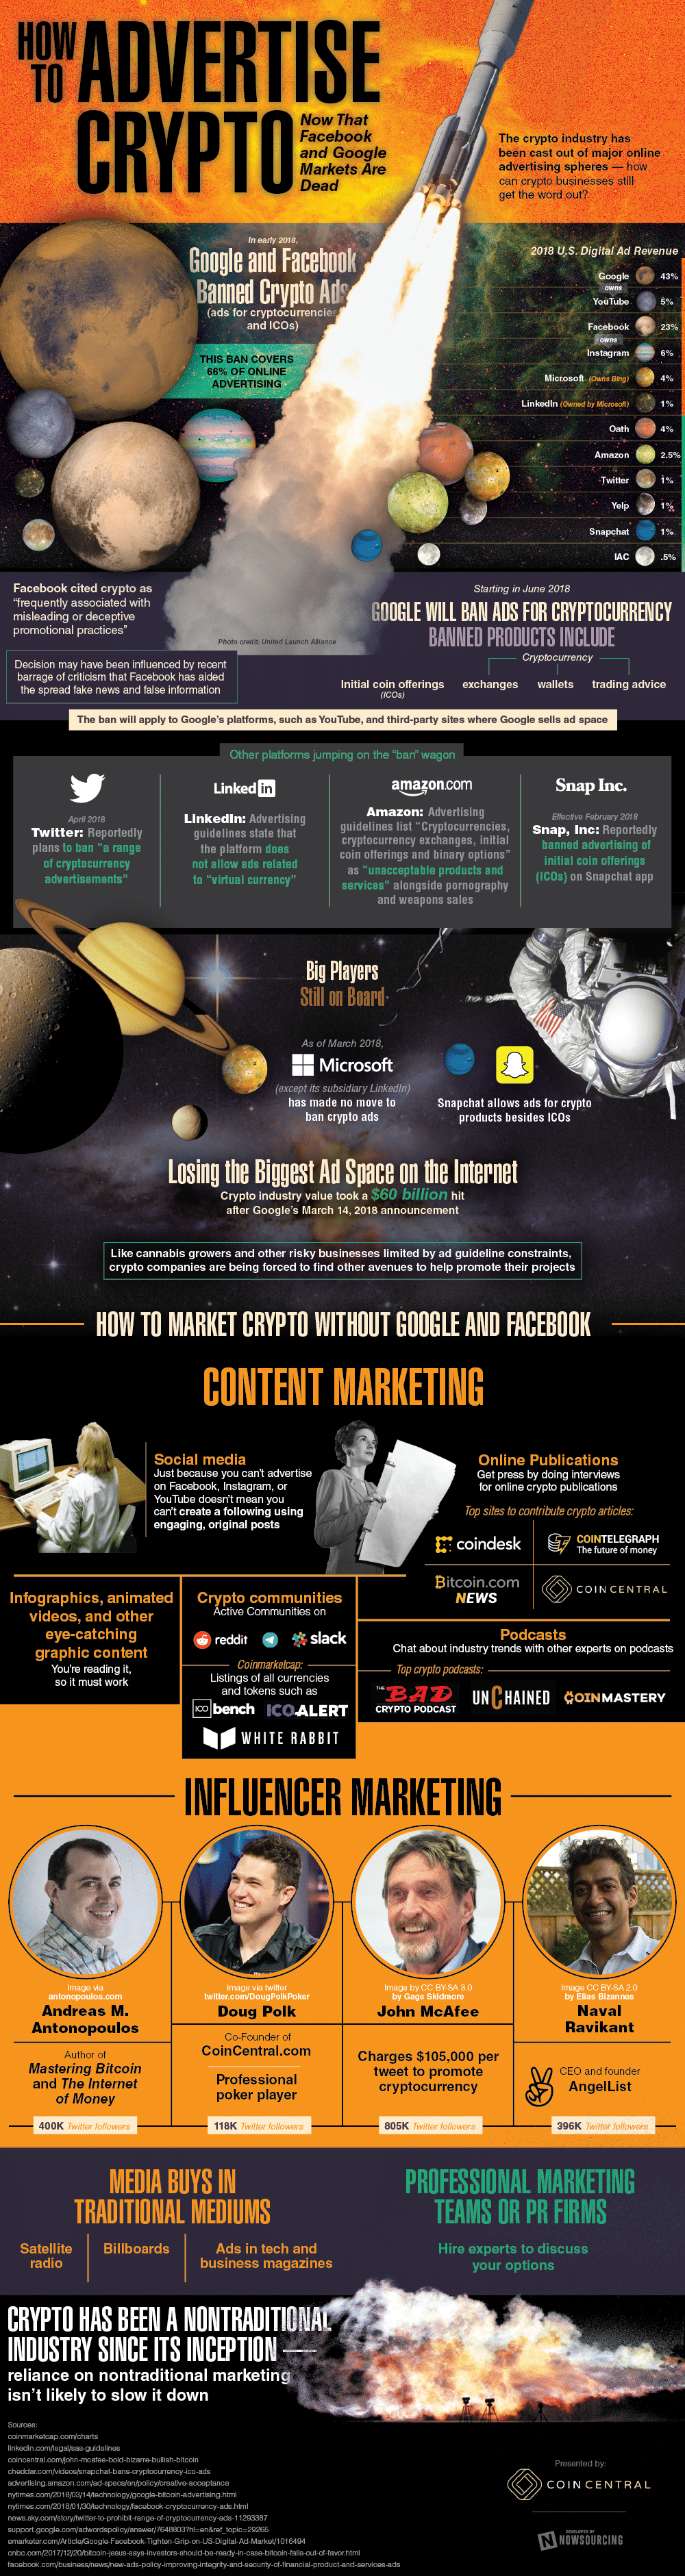 How to advertise cryptocurrency now that Facebook and Google markets are dead? - #infographic